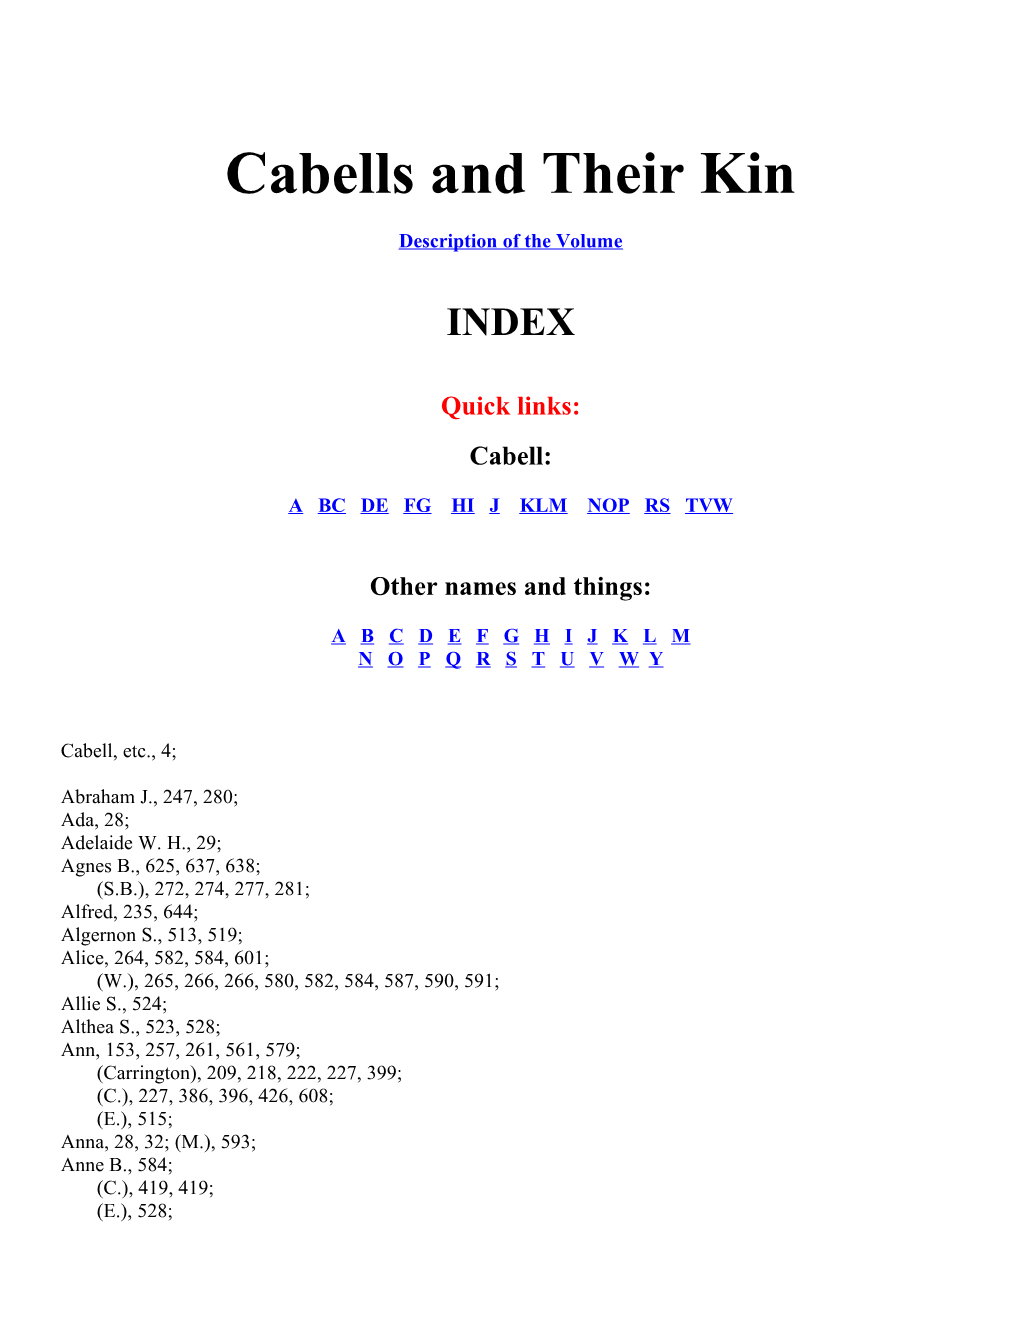 Cabells and Their Kin